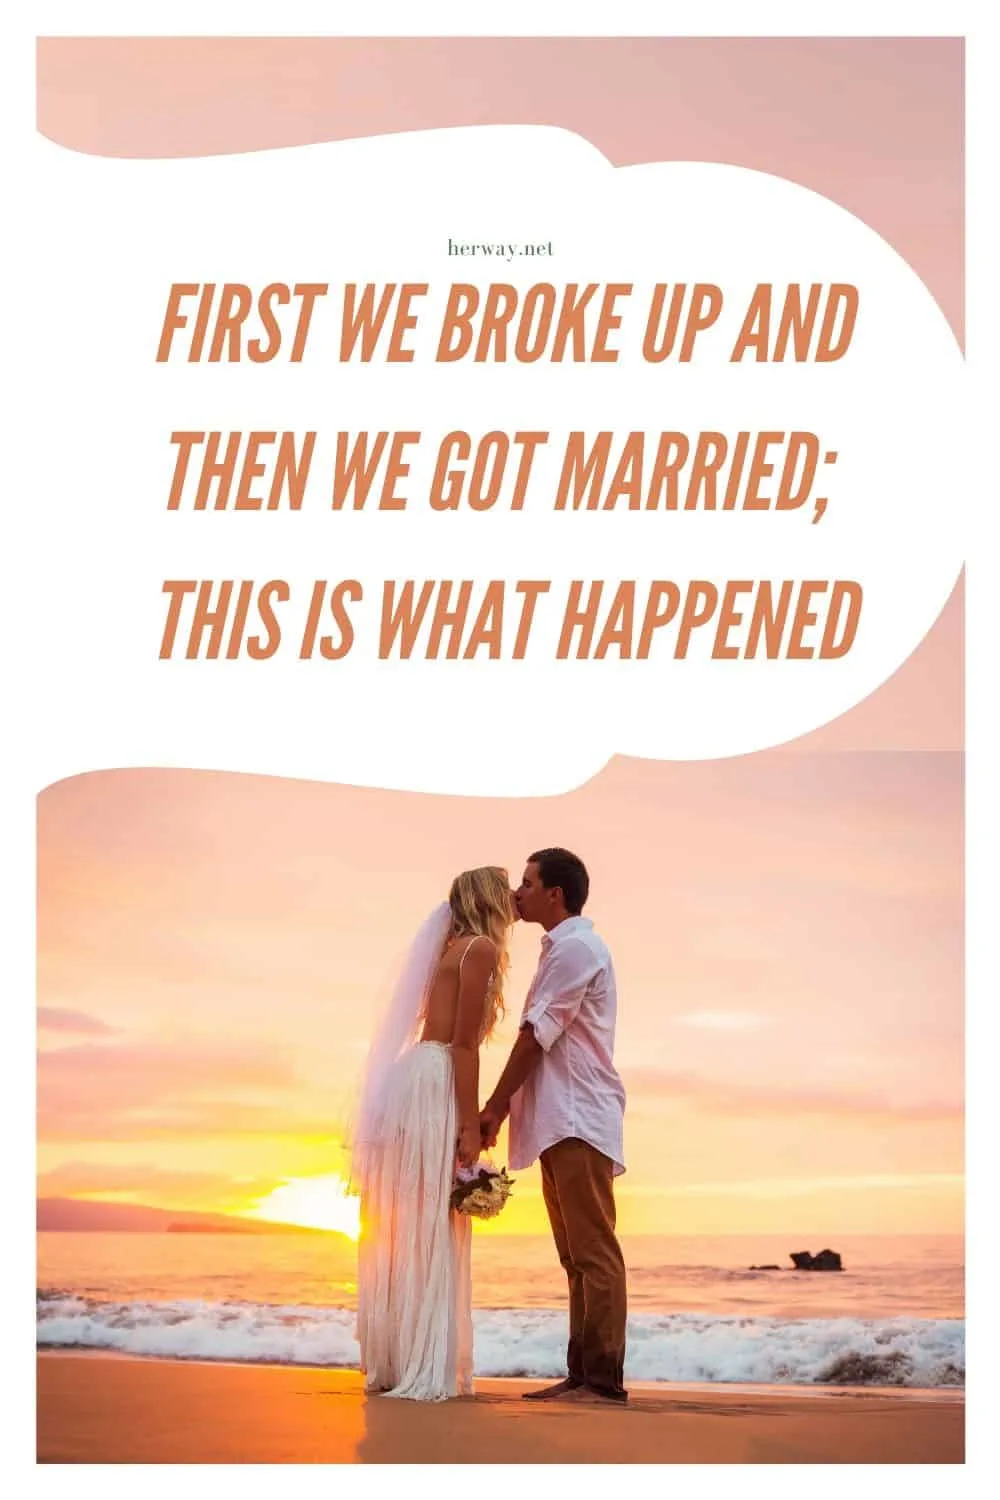 First We Broke Up And Then We Got Married; This Is What Happened